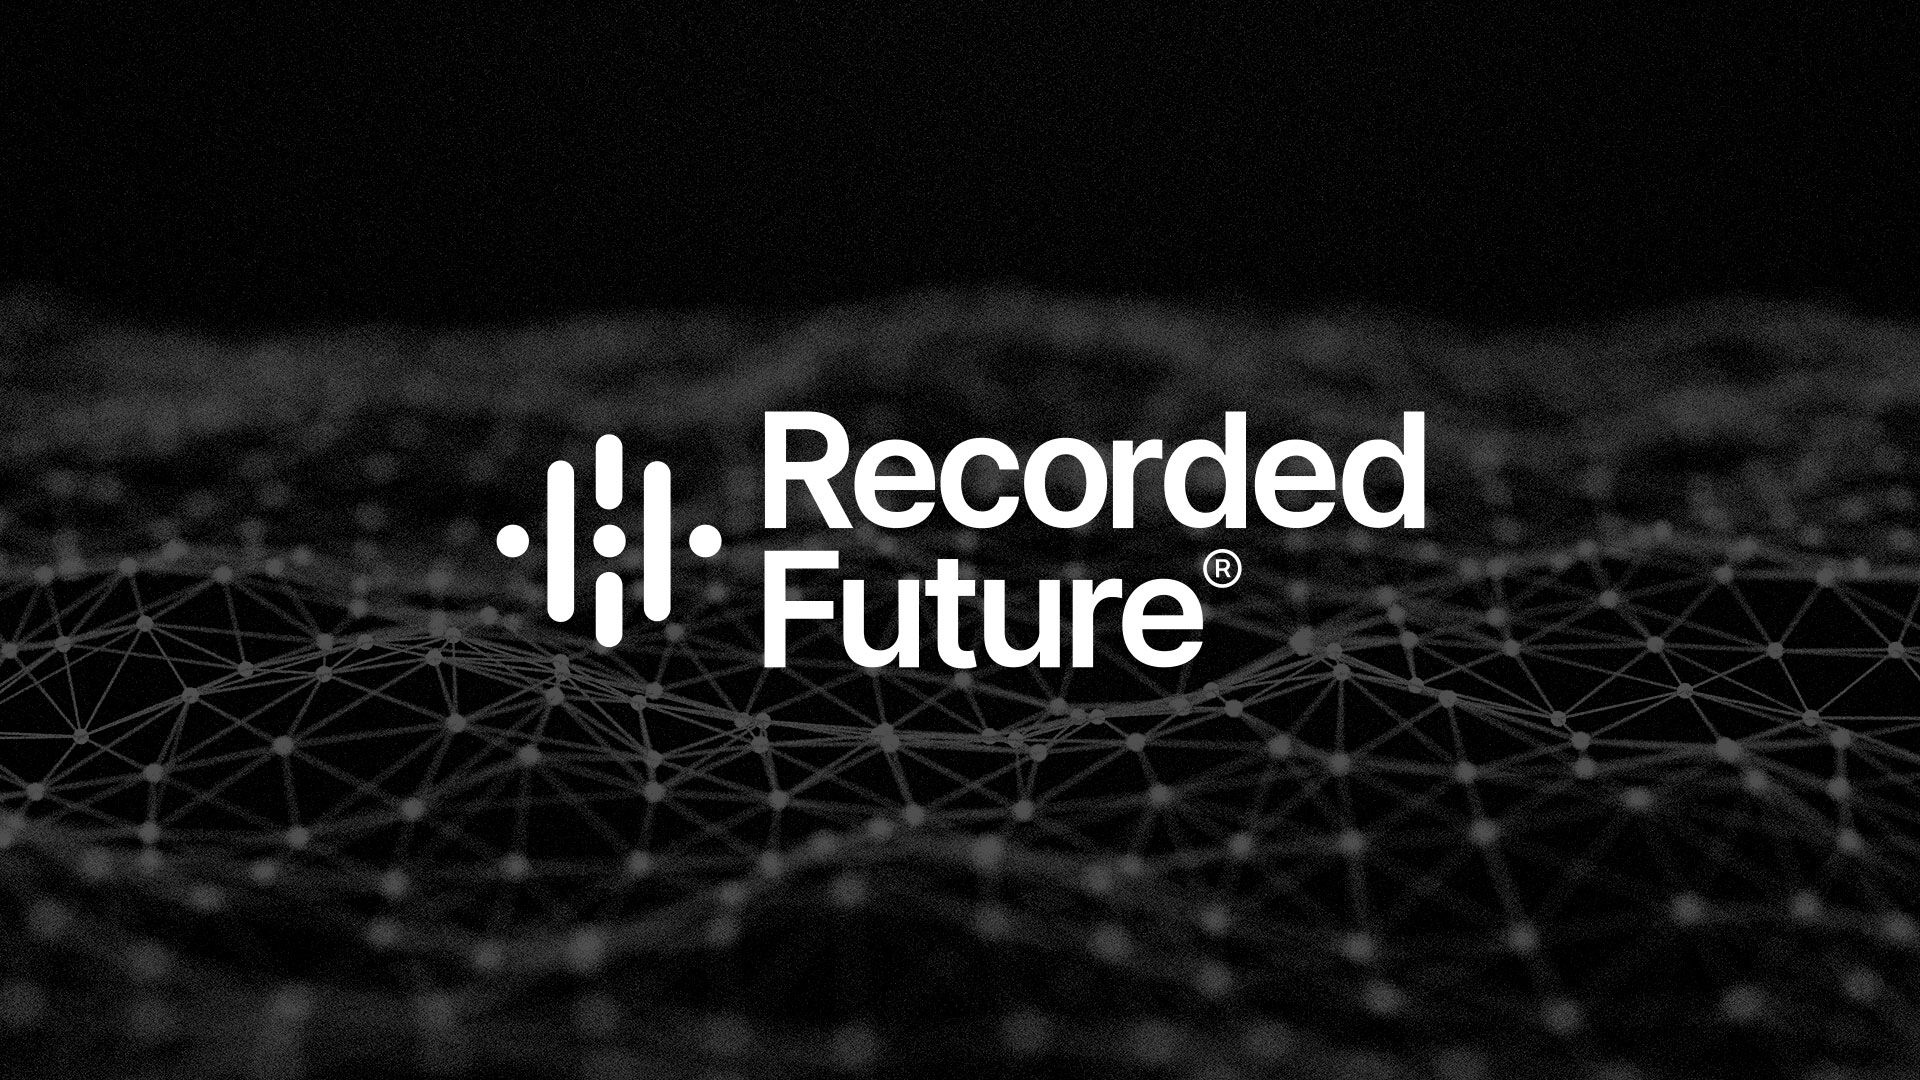 Recorded Future to Host Predict 2020 Security Intelligence Conference